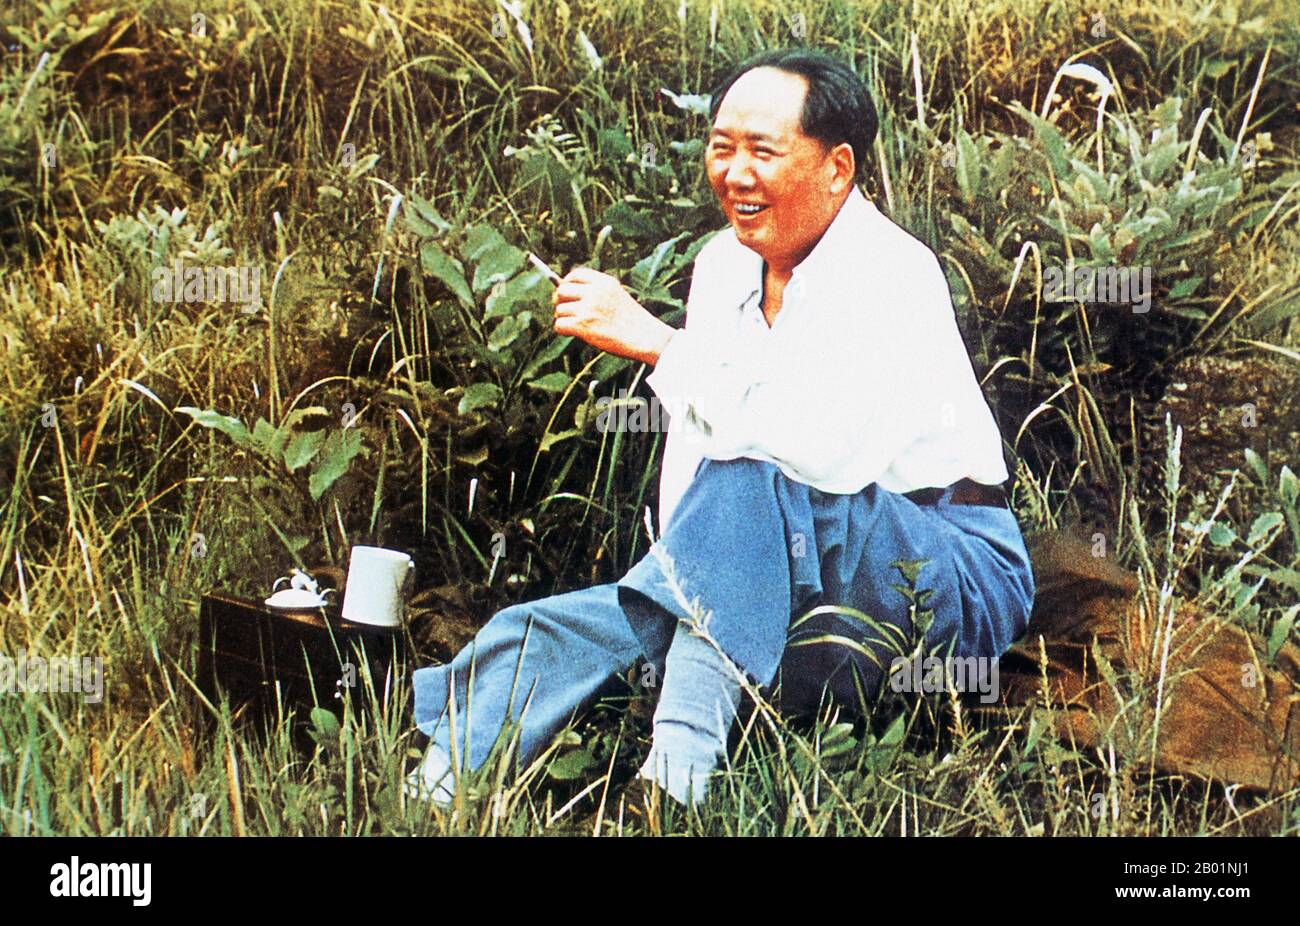 China: Mao Zedong (26 December 1893 - 9 September 1976), Chairman of the People's Republic of China, in Hangzhou, 1954.  Mao Zedong, also transliterated as Mao Tse-tung, was a Chinese communist revolutionary, guerrilla warfare strategist, author, political theorist and leader of the Chinese Revolution.  Commonly referred to as Chairman Mao, he was the architect of the People's Republic of China (PRC) from its establishment in 1949, and held authoritarian control over the nation until his death in 1976. Stock Photo